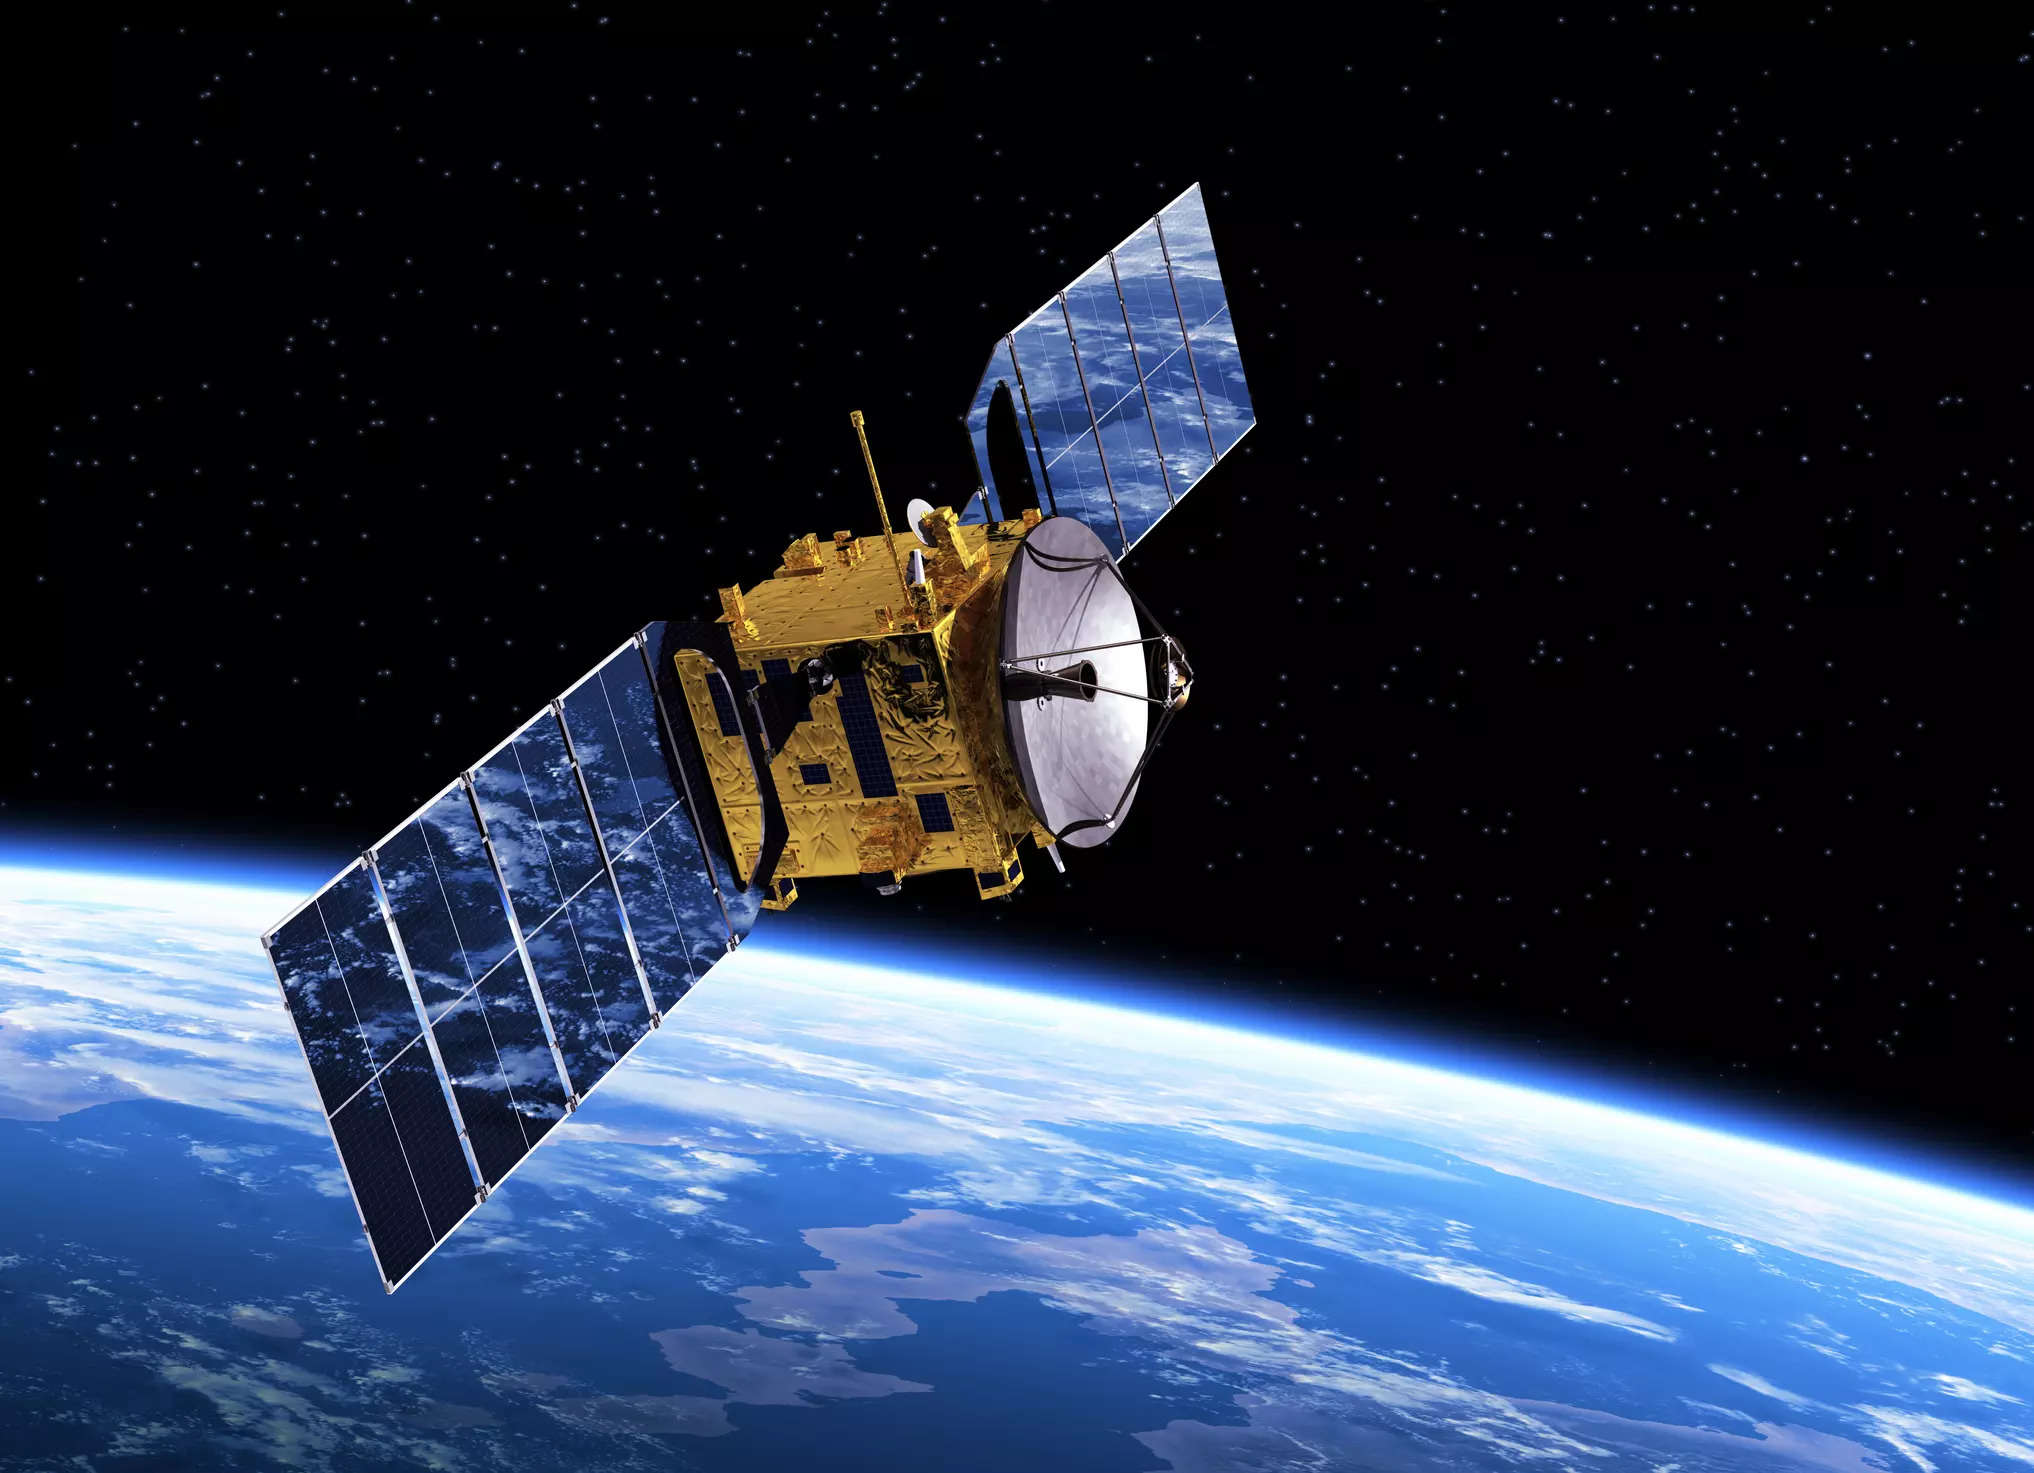 Jio tells Trai auction of spectrum for broadband-from-space services gaining traction globally